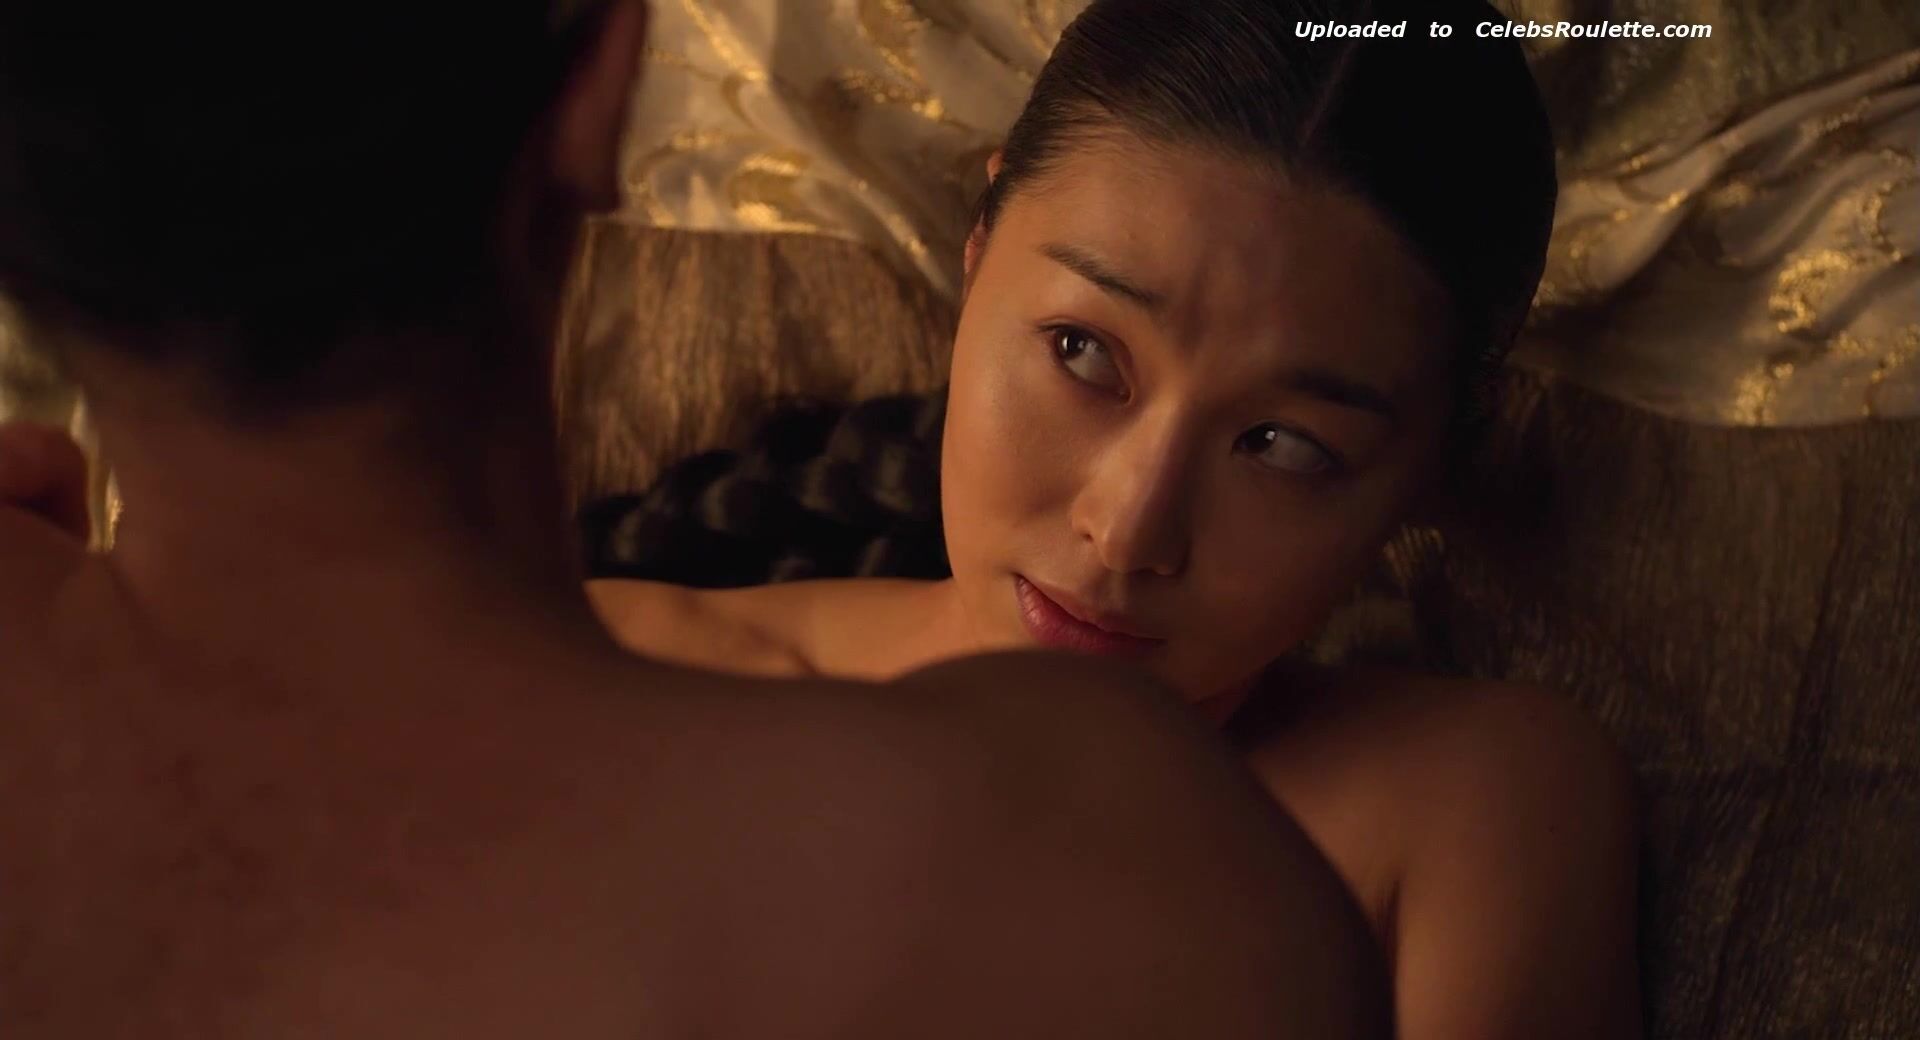 Cfnm No time to think about morality when Cho Yeo-jeong kills fucker in The Concubine (2012) Cumfacial - 1